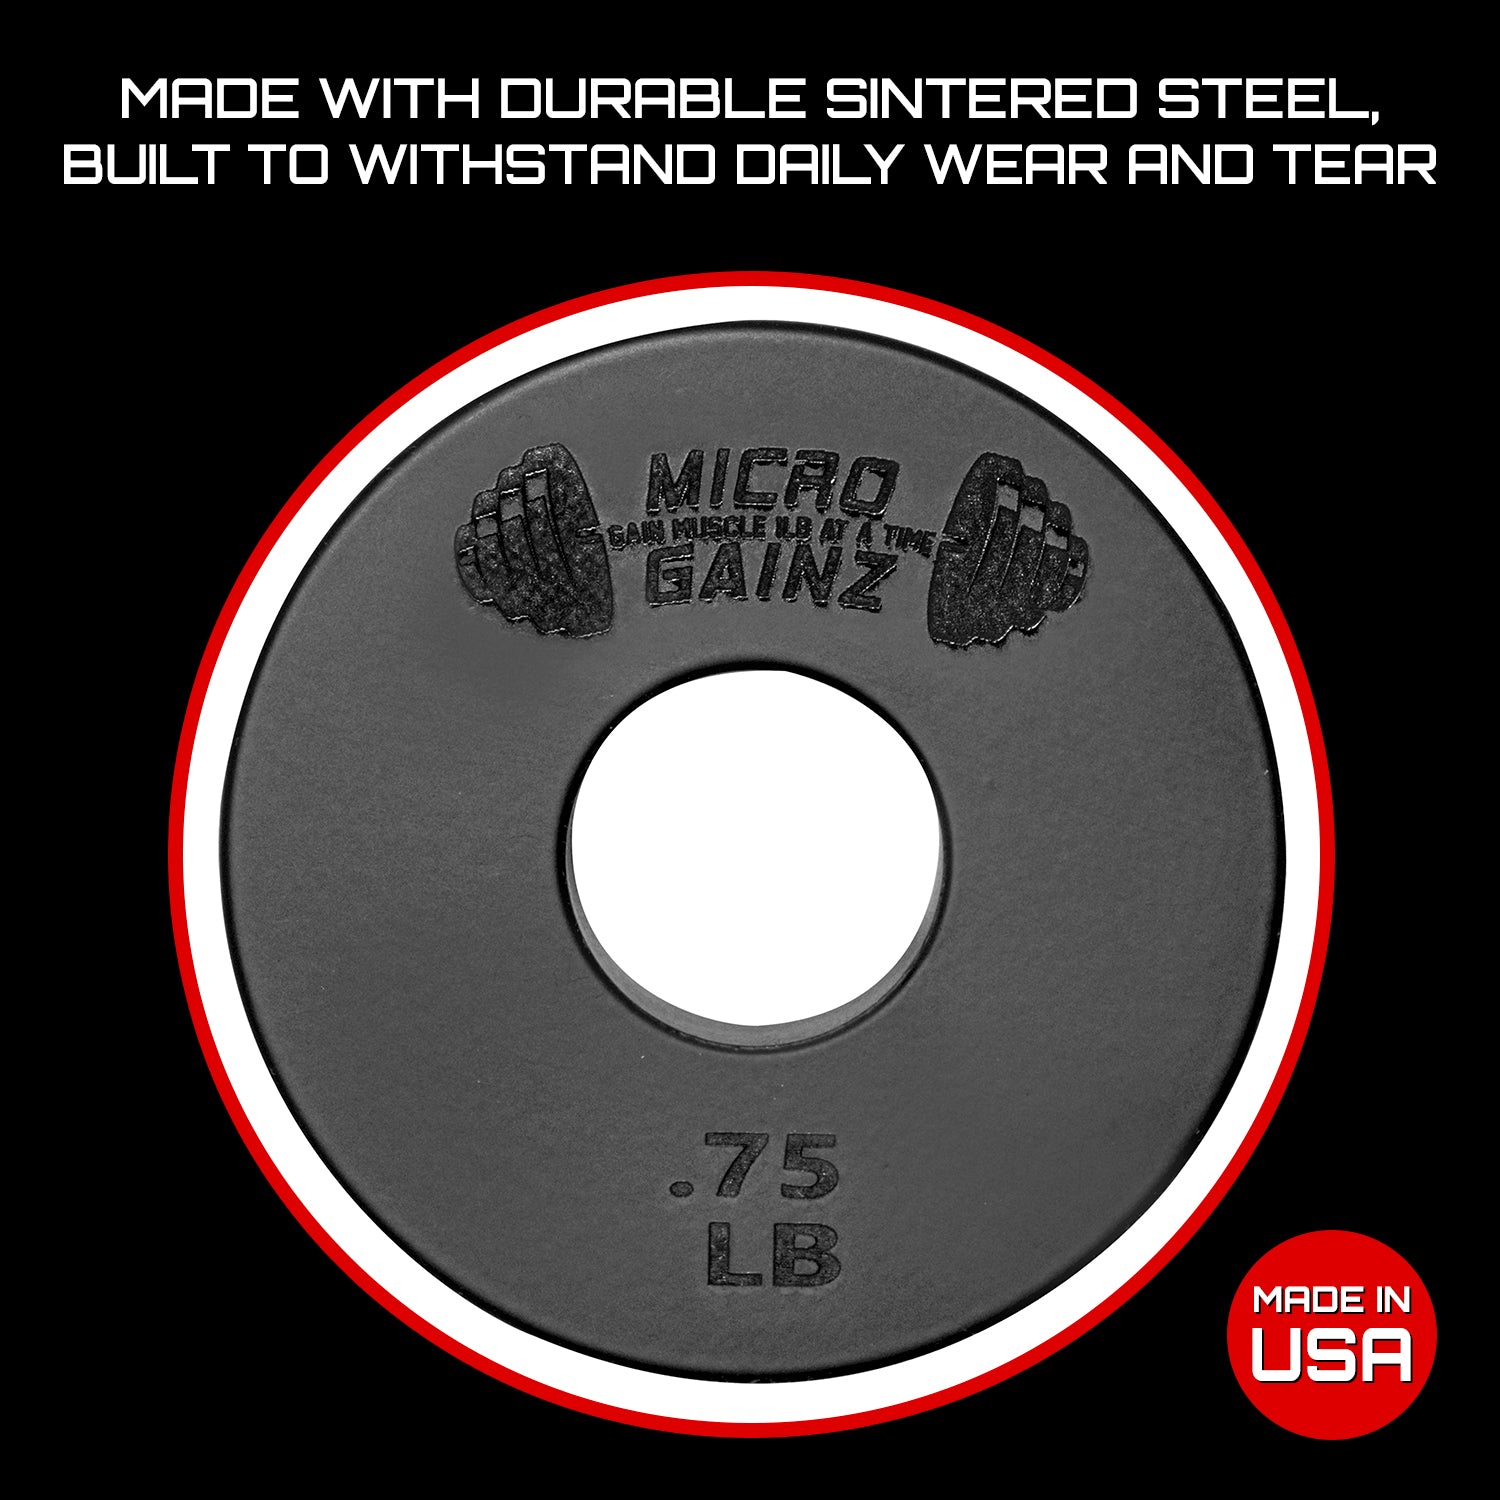 Micro Gainz Standard 1-Inch Center Hole Fractional Weight Plates Pair of .75LB Plates